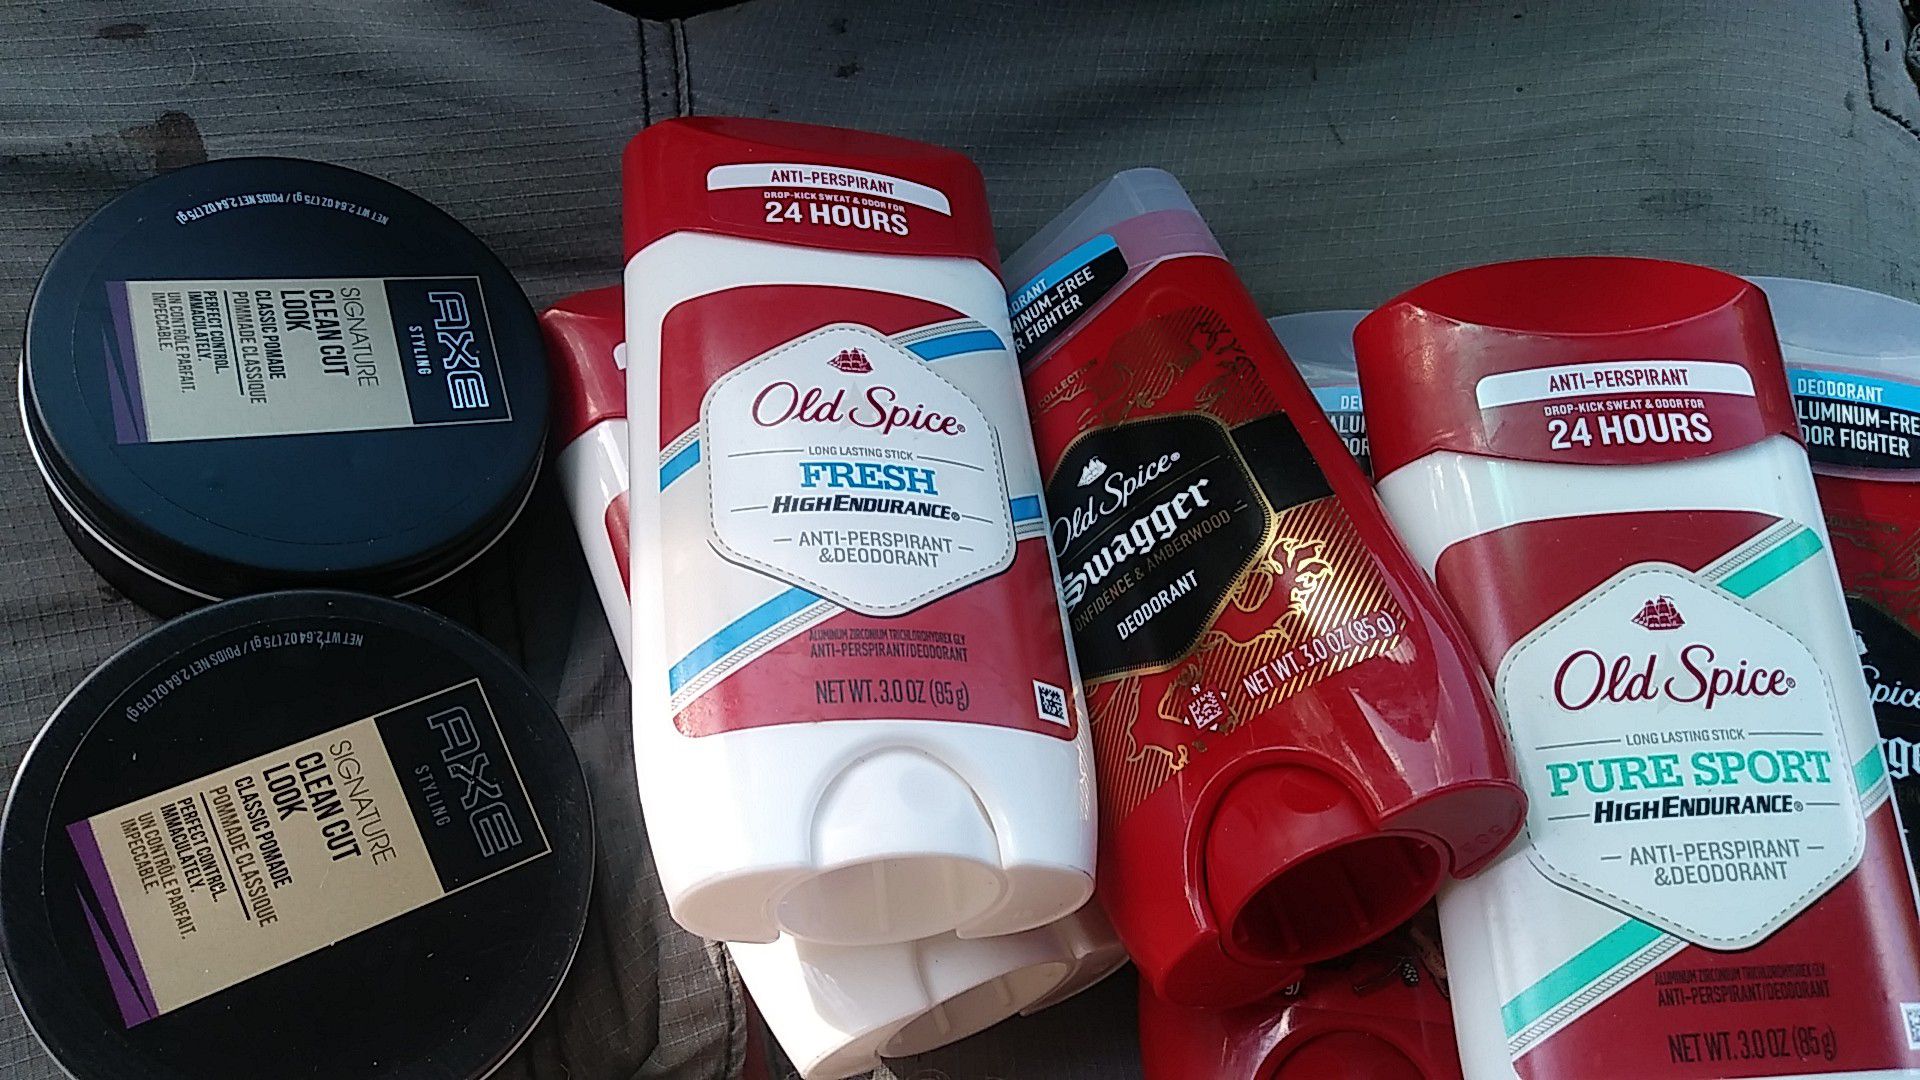 Deodorant old spice all diffirent kinds axe styling gel